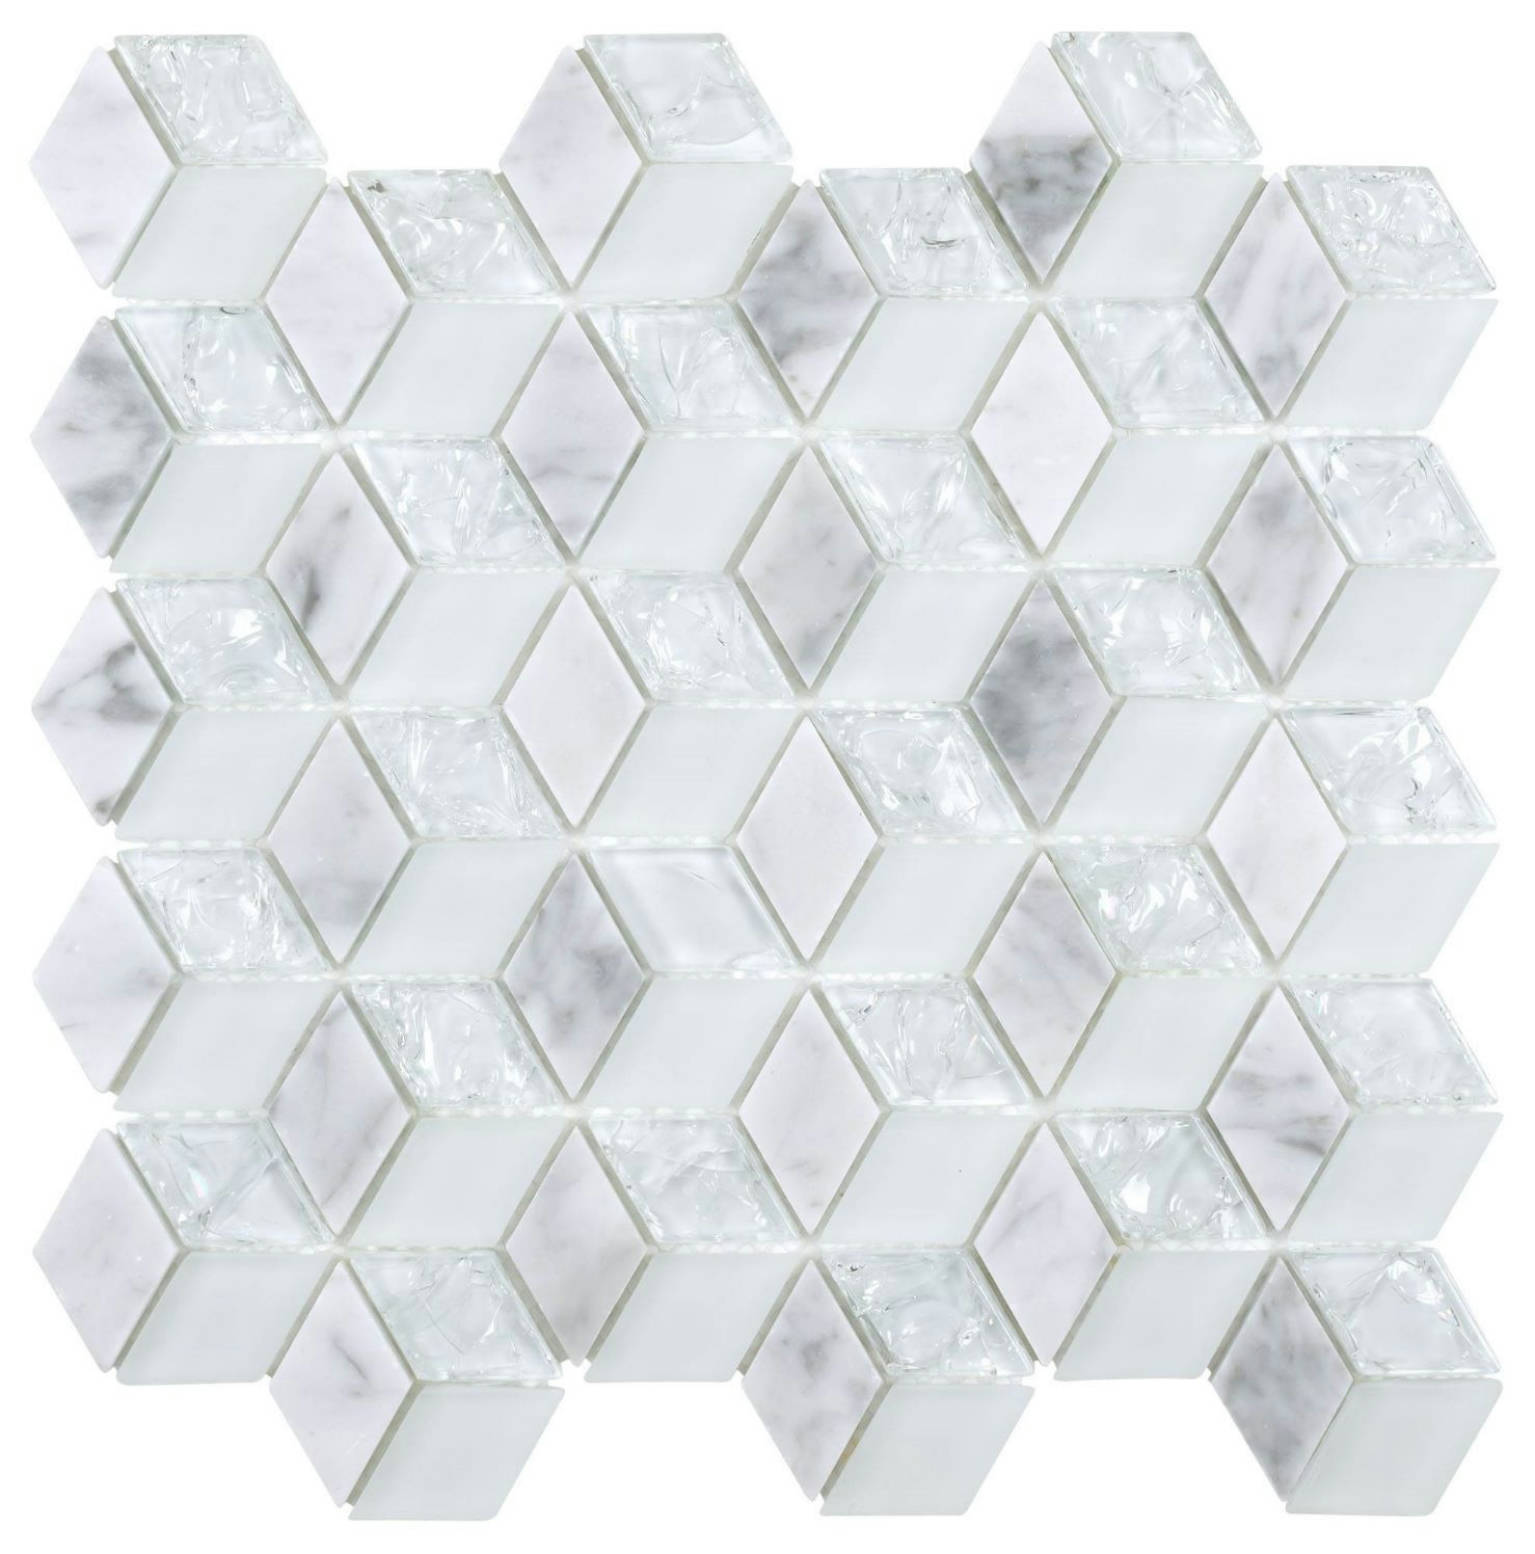 DIA-198 | Stones & More | Finest selection of Mosaics, Glass, Tile and Stone